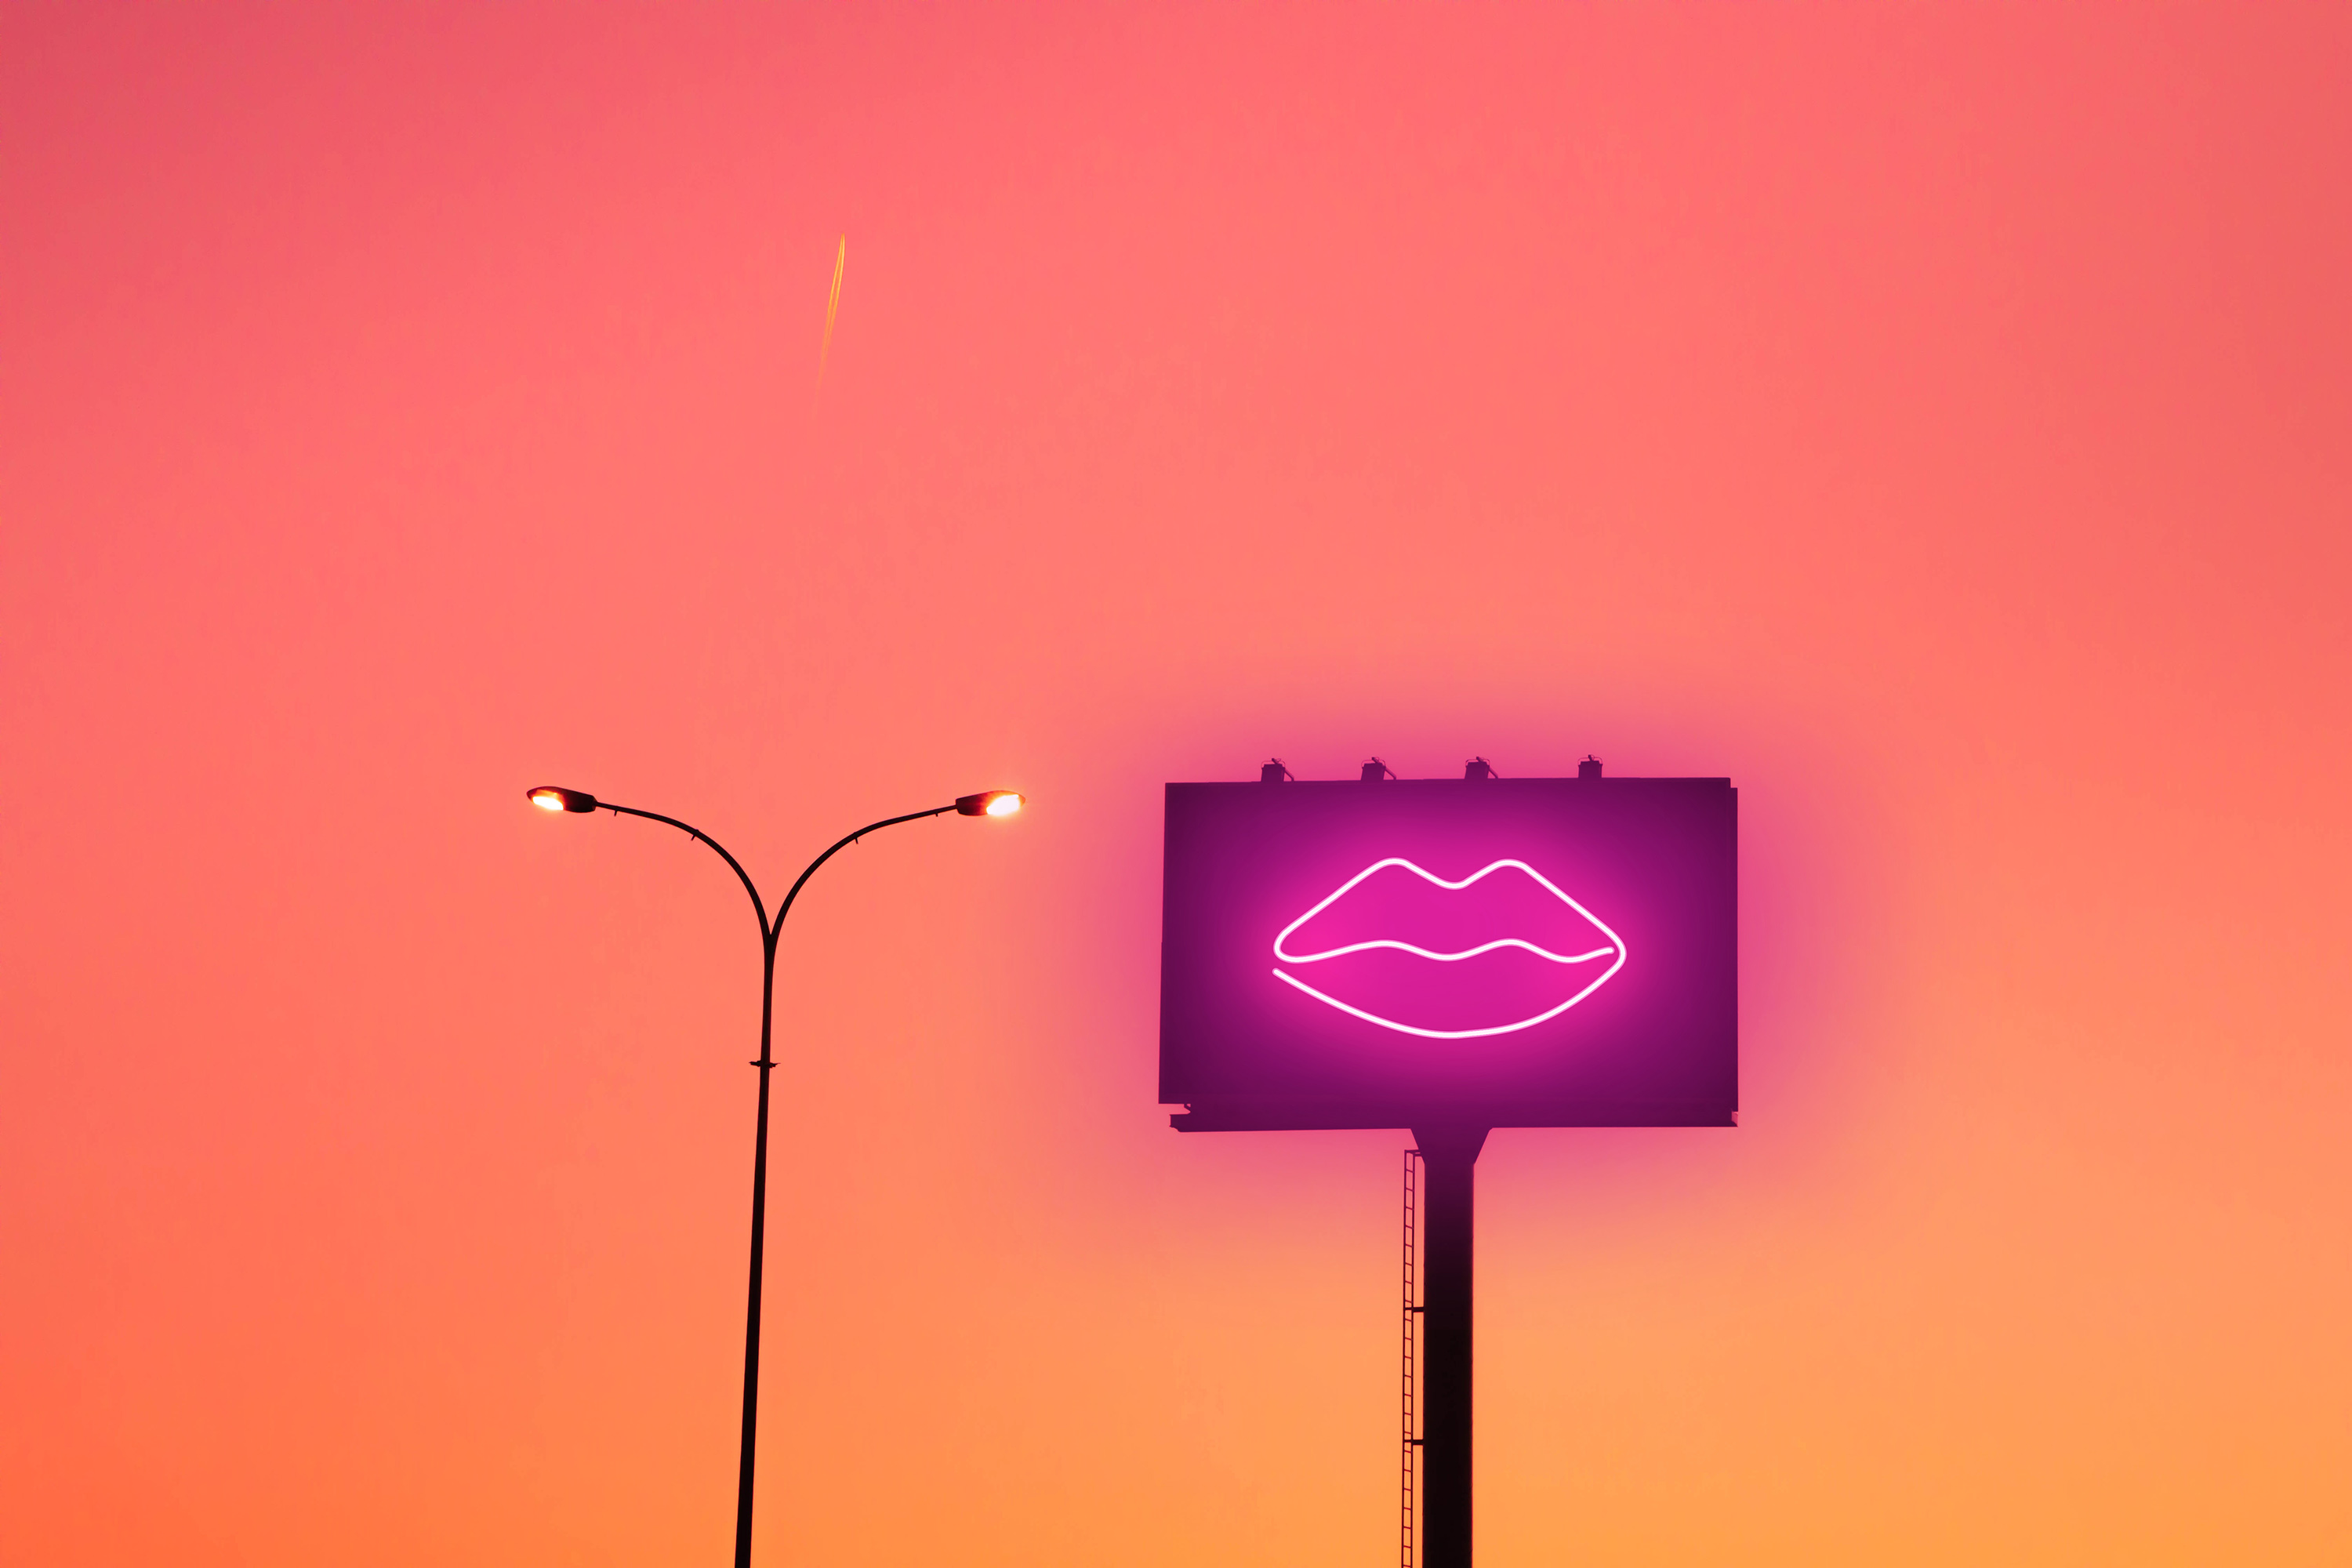 image of lips on billboard next to street light with sunset in background sex tech ces vibrator